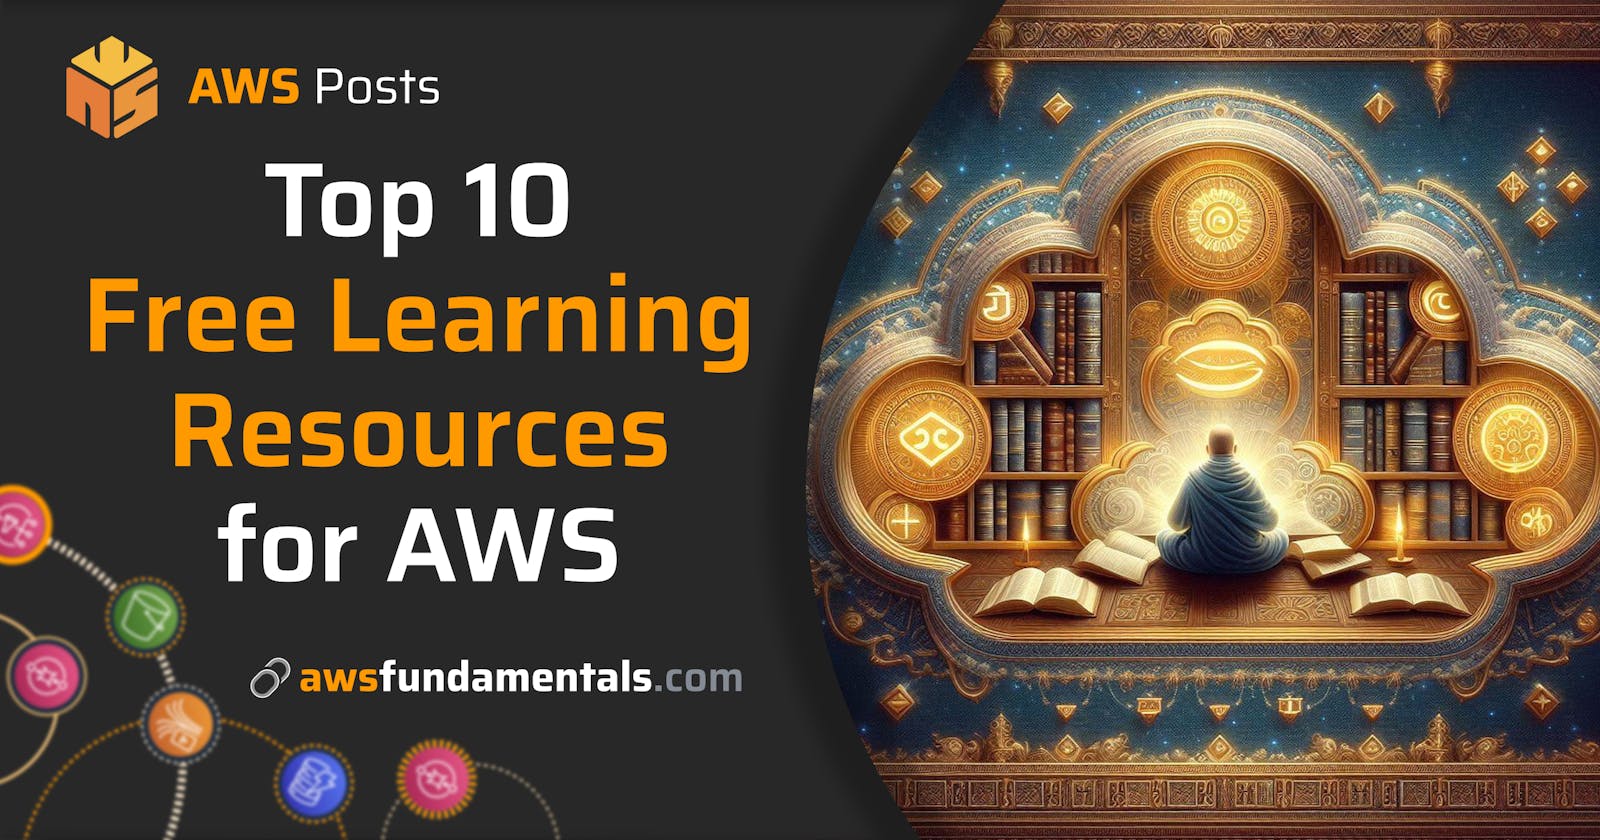 Top 10 Free Learning Resources for AWS